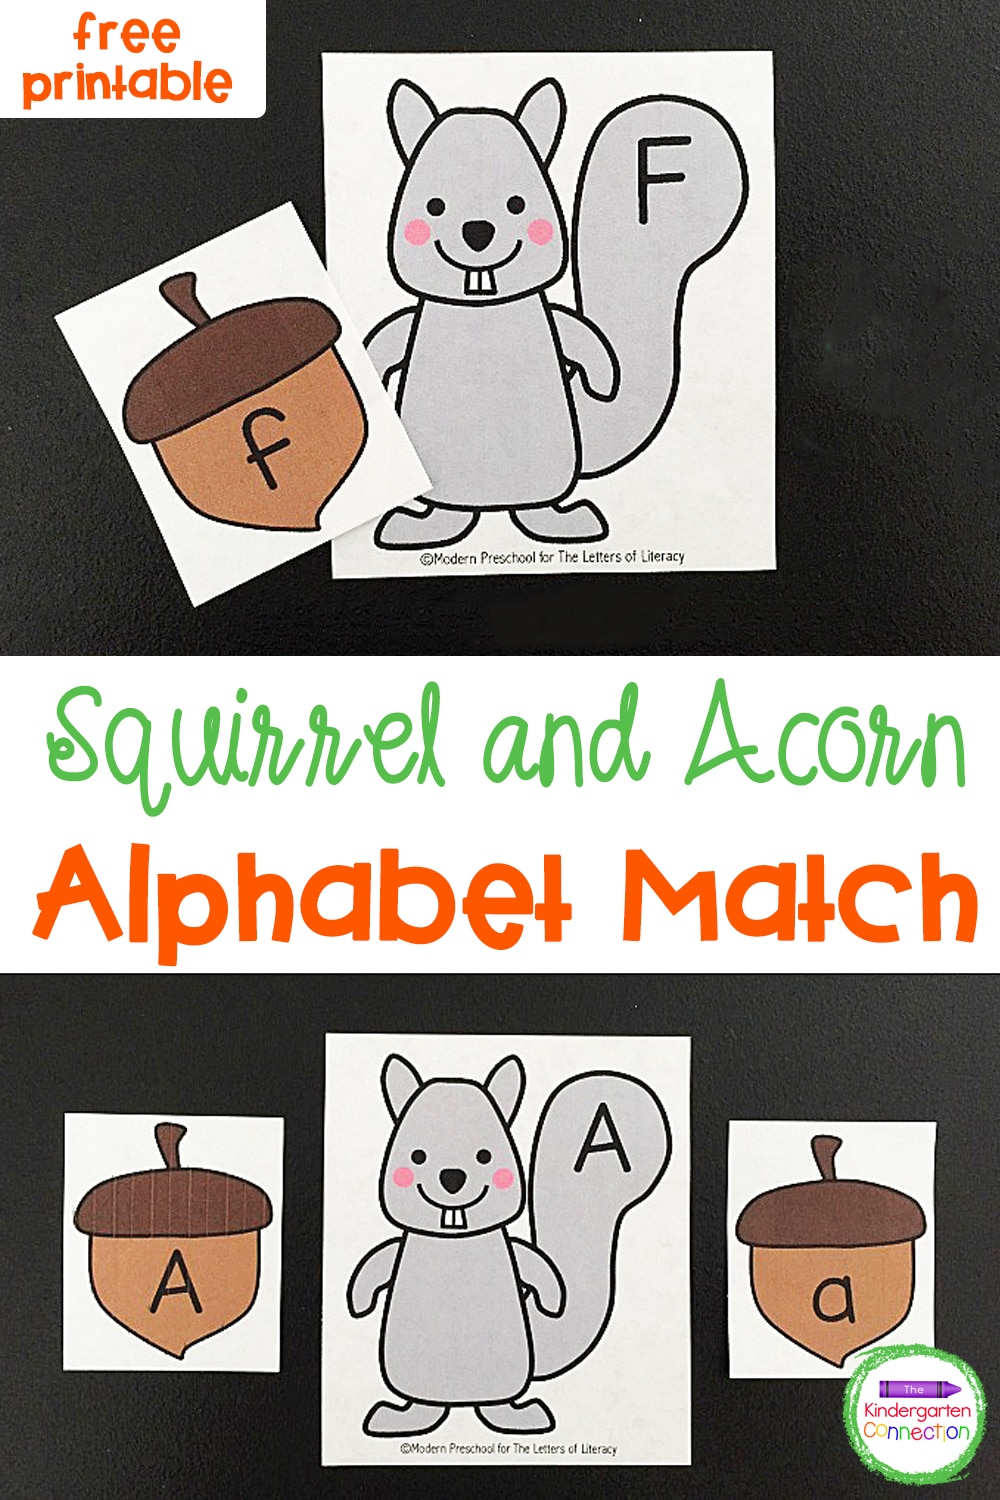 This squirrel and acorn alphabet match is a great activity for preschoolers and kindergarteners to practice upper and lowercase letters this fall!